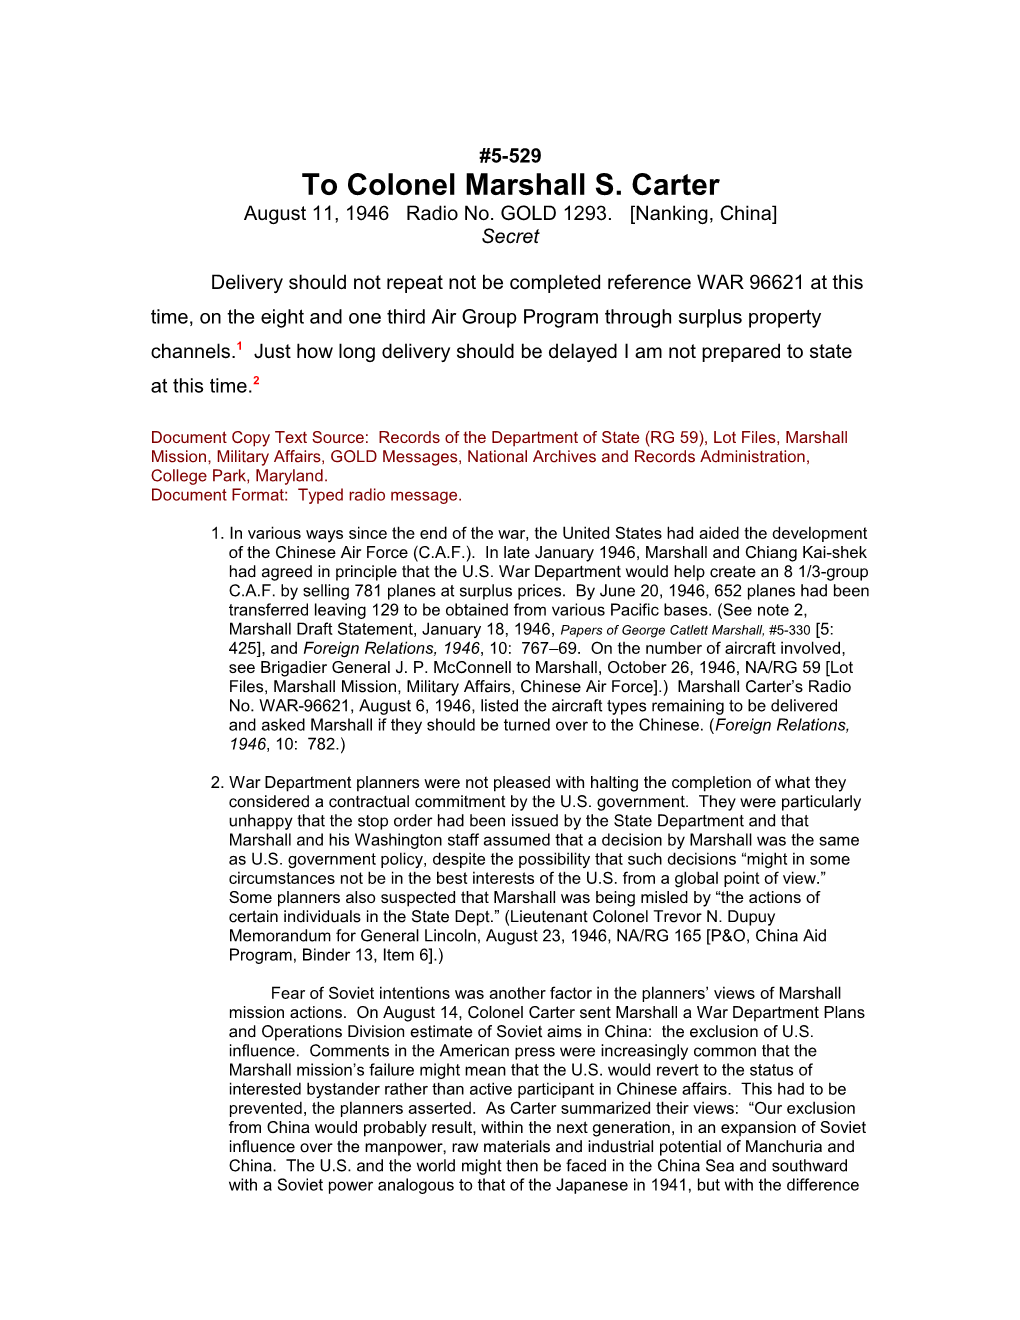 To Colonel Marshall S. Carter